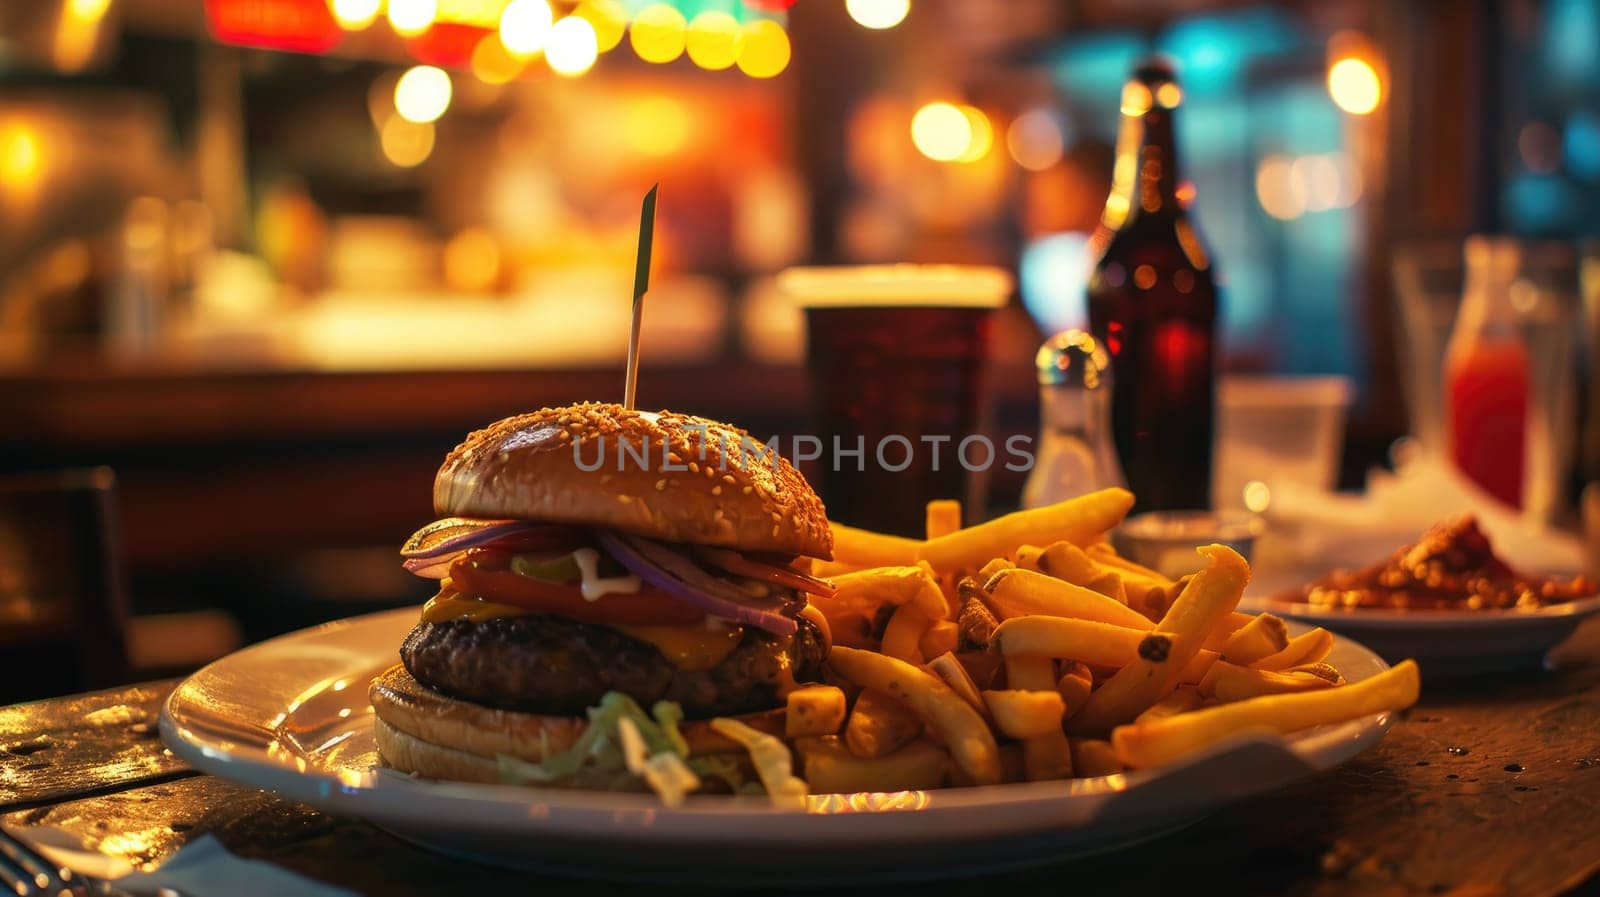 Mouth-watering hamburger with fries on a wooden table in a cozy evening cafe by Yurich32